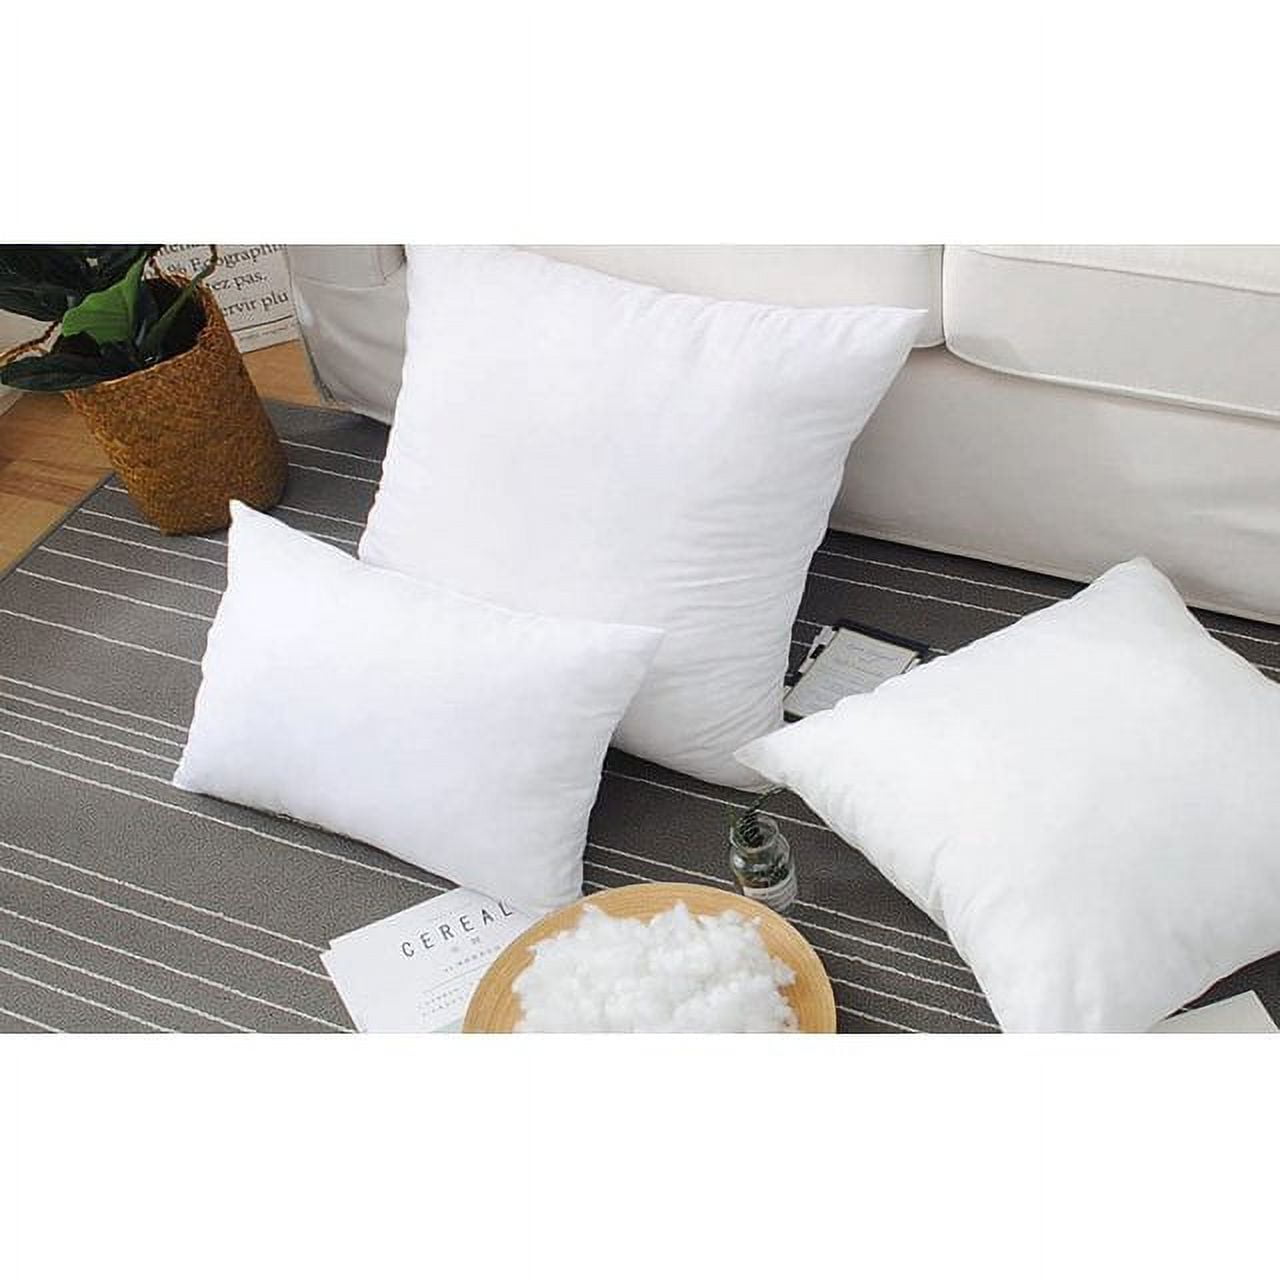  Sleepsia 12 x 20 Pillow Inserts (Set of 2) - Fluffy Polyester  Down Alternative Lightweight Bed and Couch Pillows - Rectangular, Sofa Decorative  Pillow Inserts - White Couch Pillow : Home & Kitchen